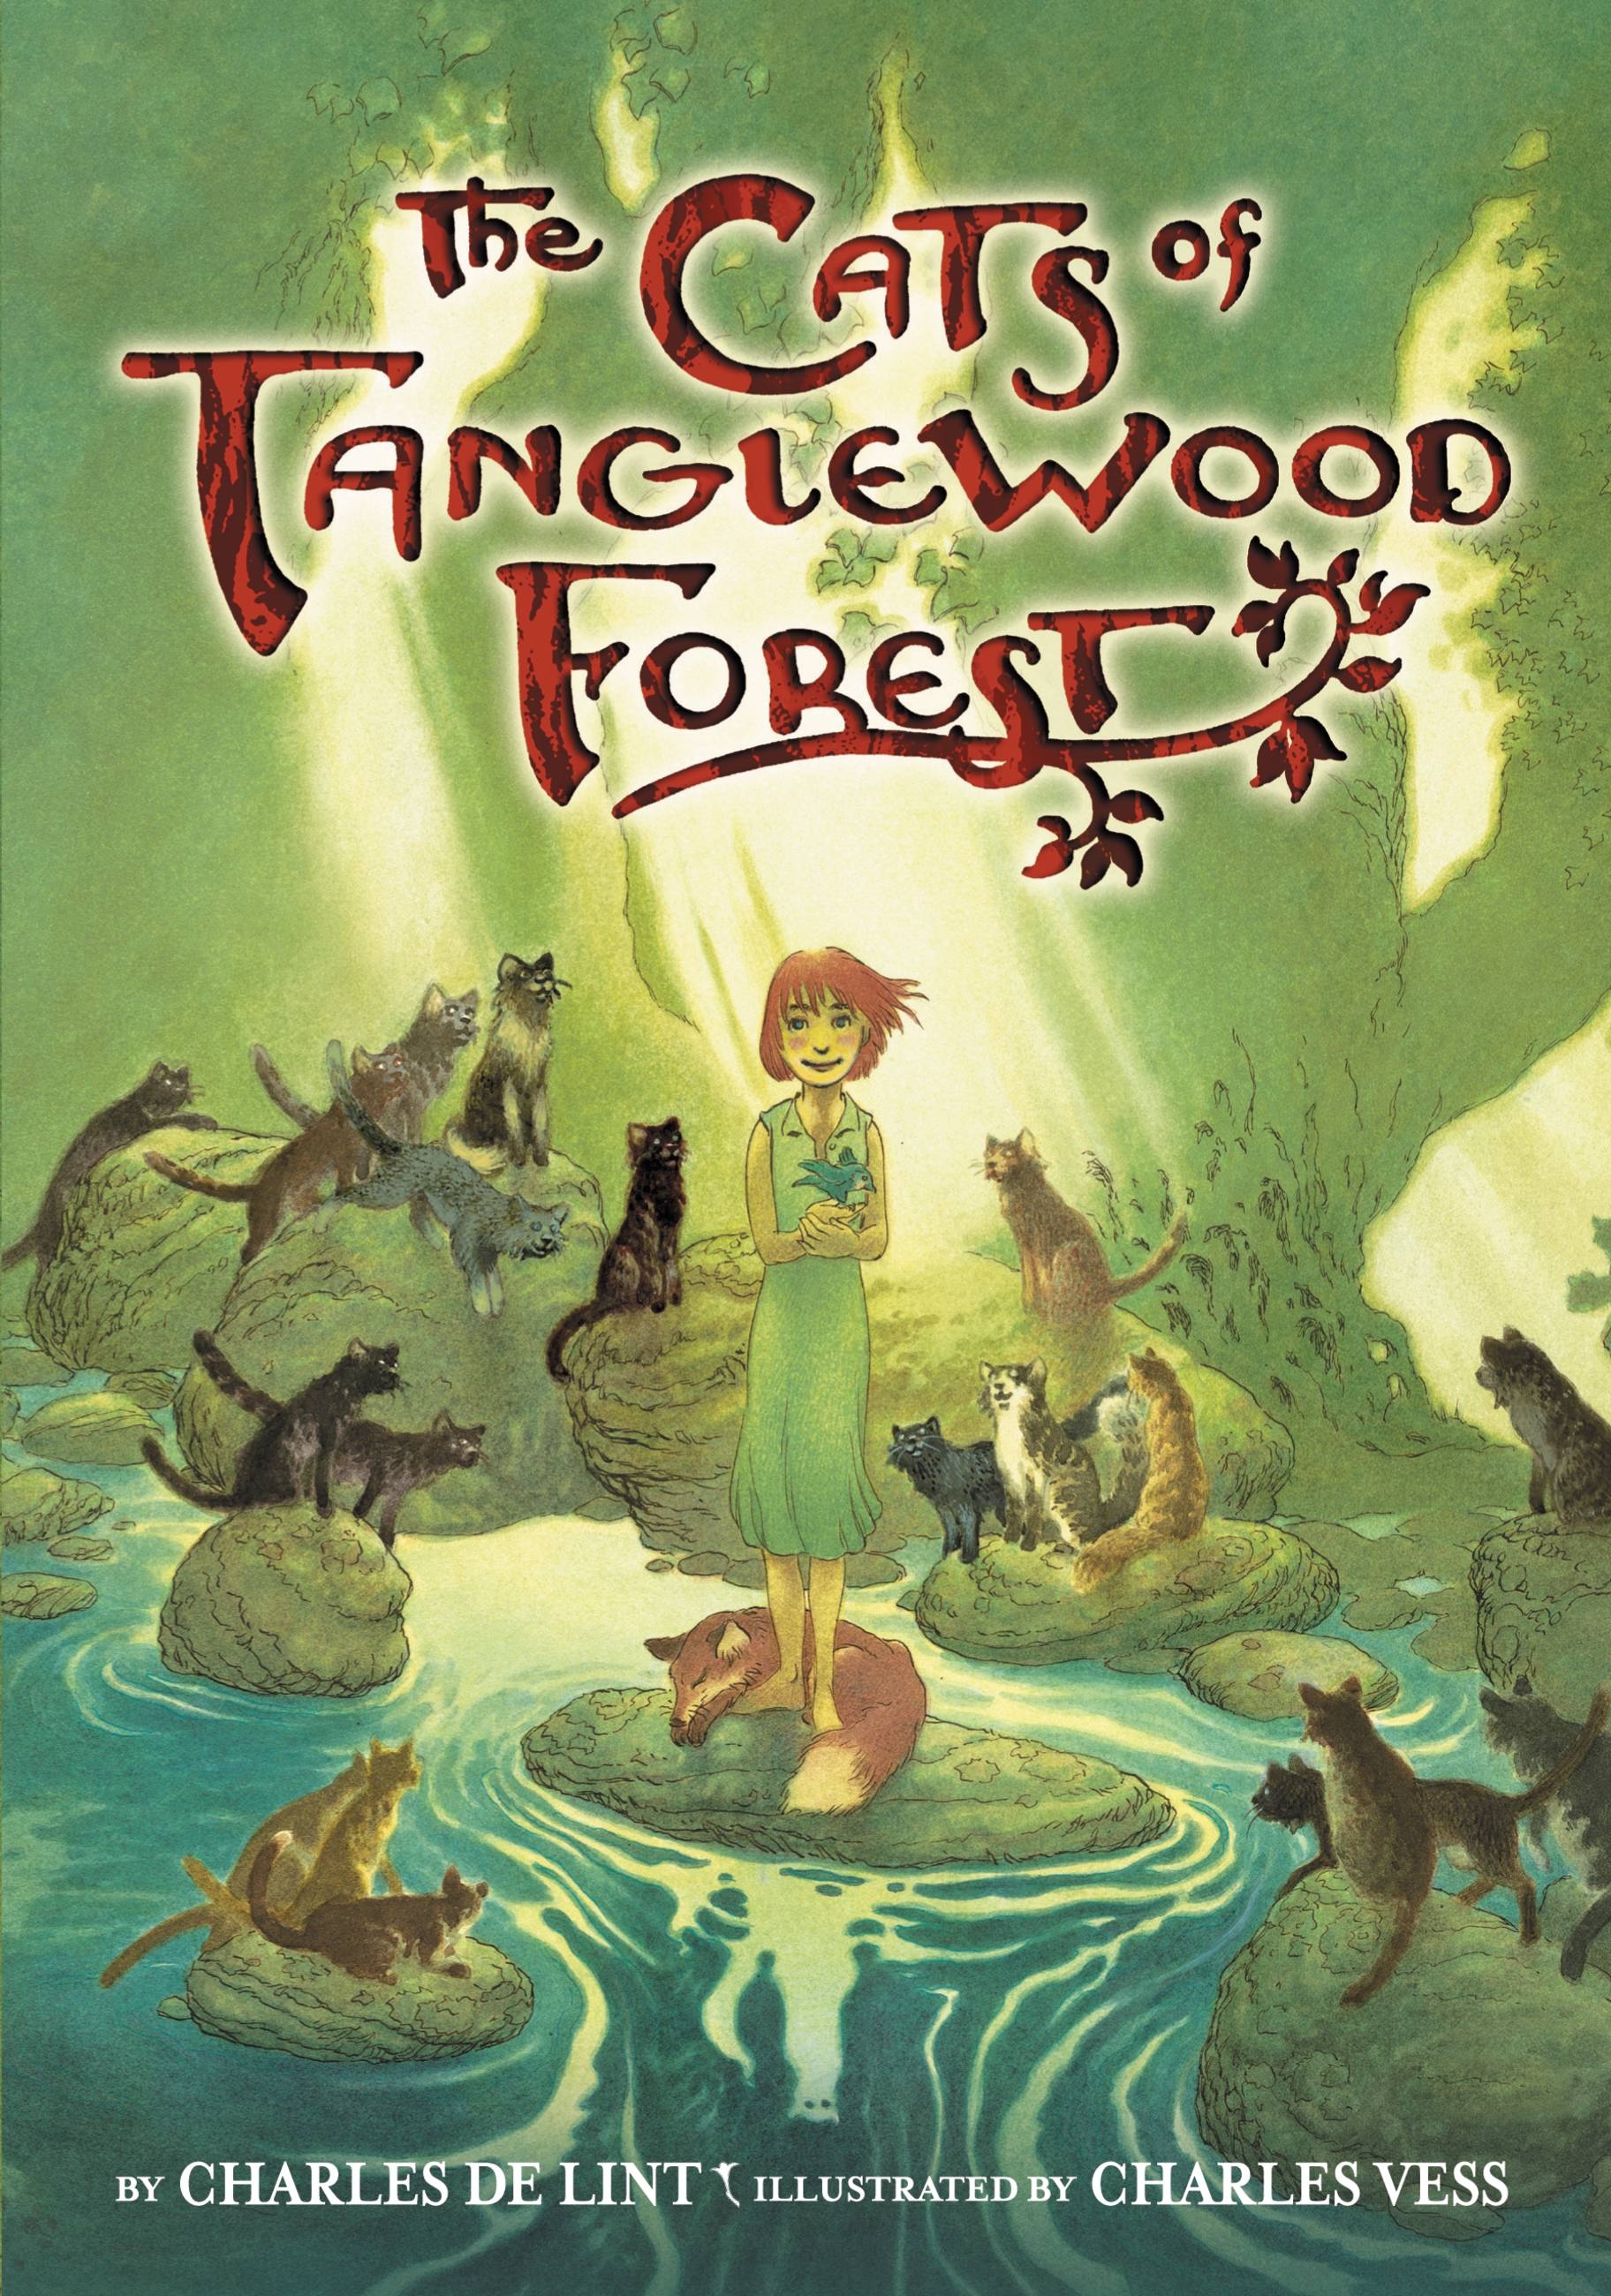 The Cats of Tanglewood Forest by Charles de Lint | Hachette Book Group